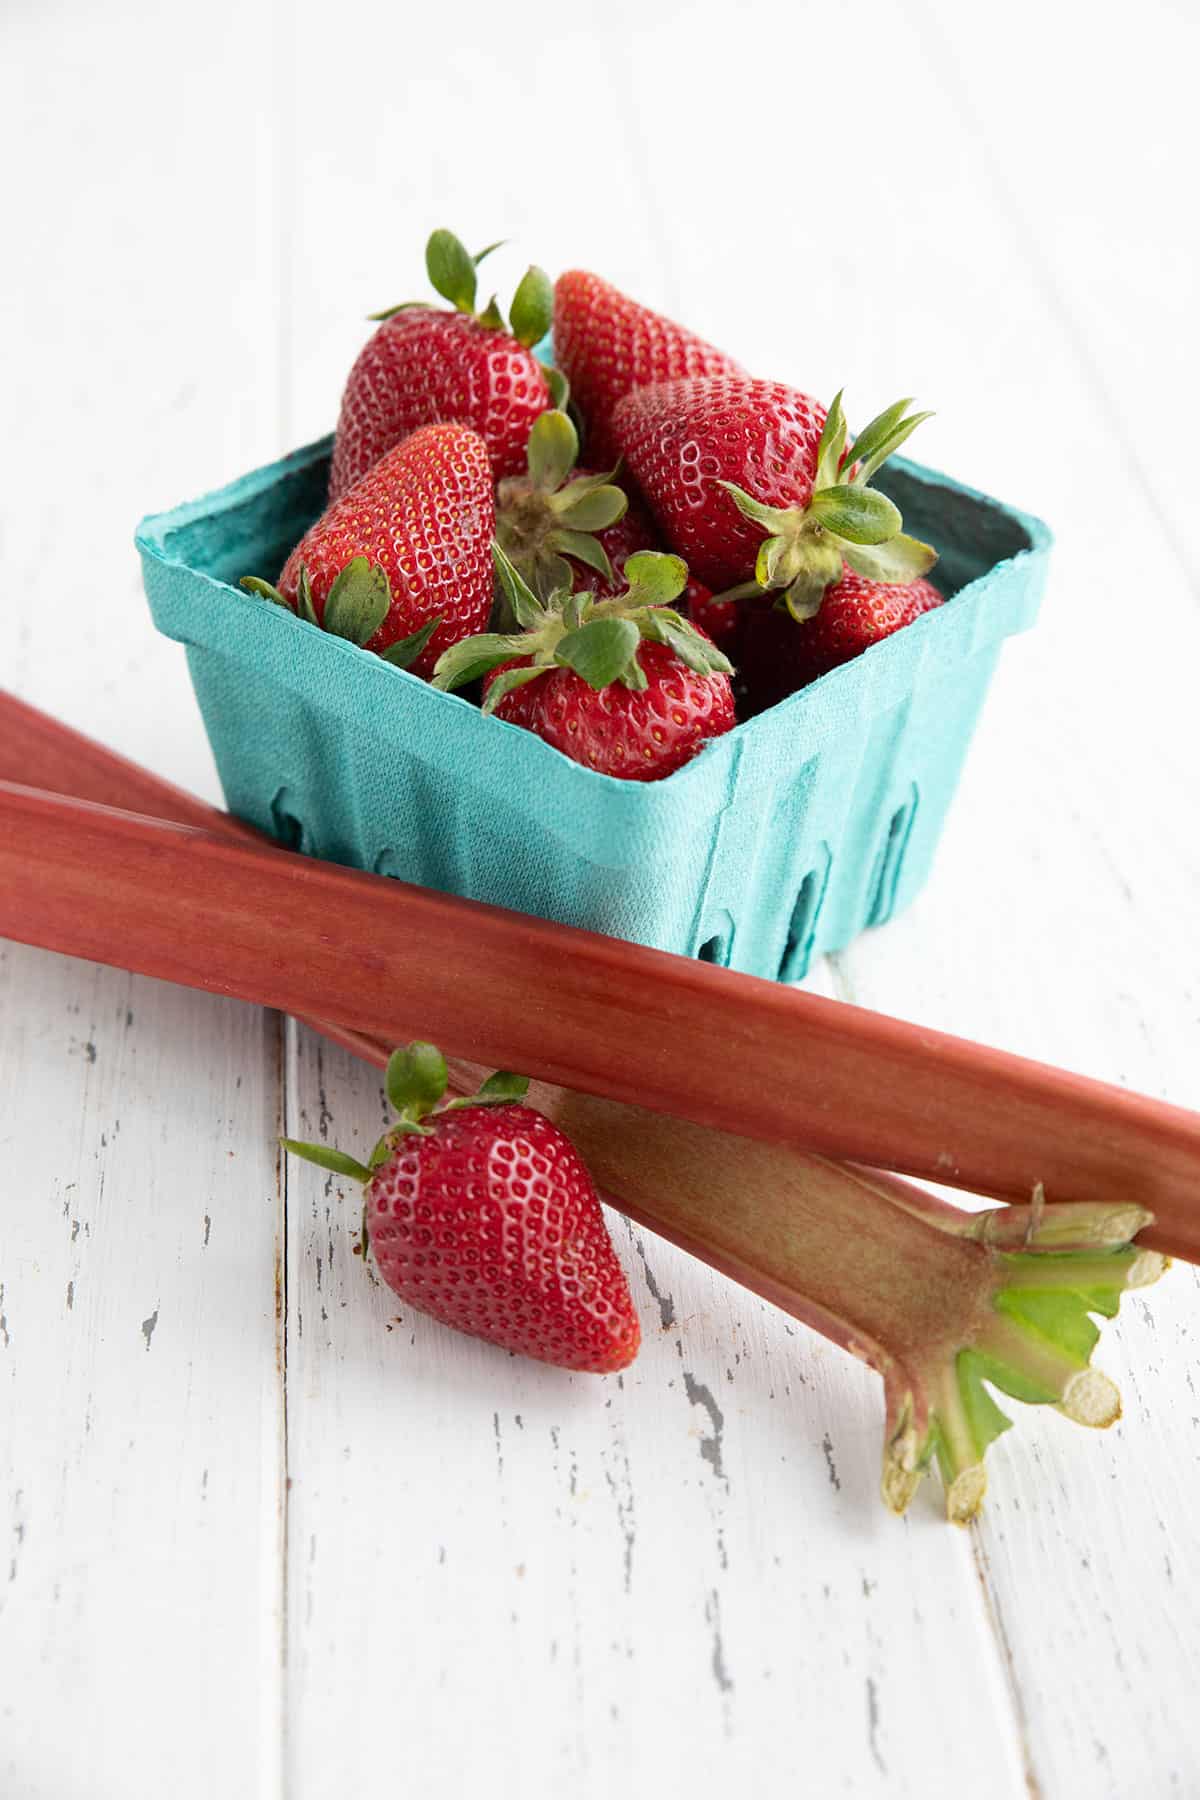 A container of fresh strawberries and some rhubarb stalks on a white wooden table.